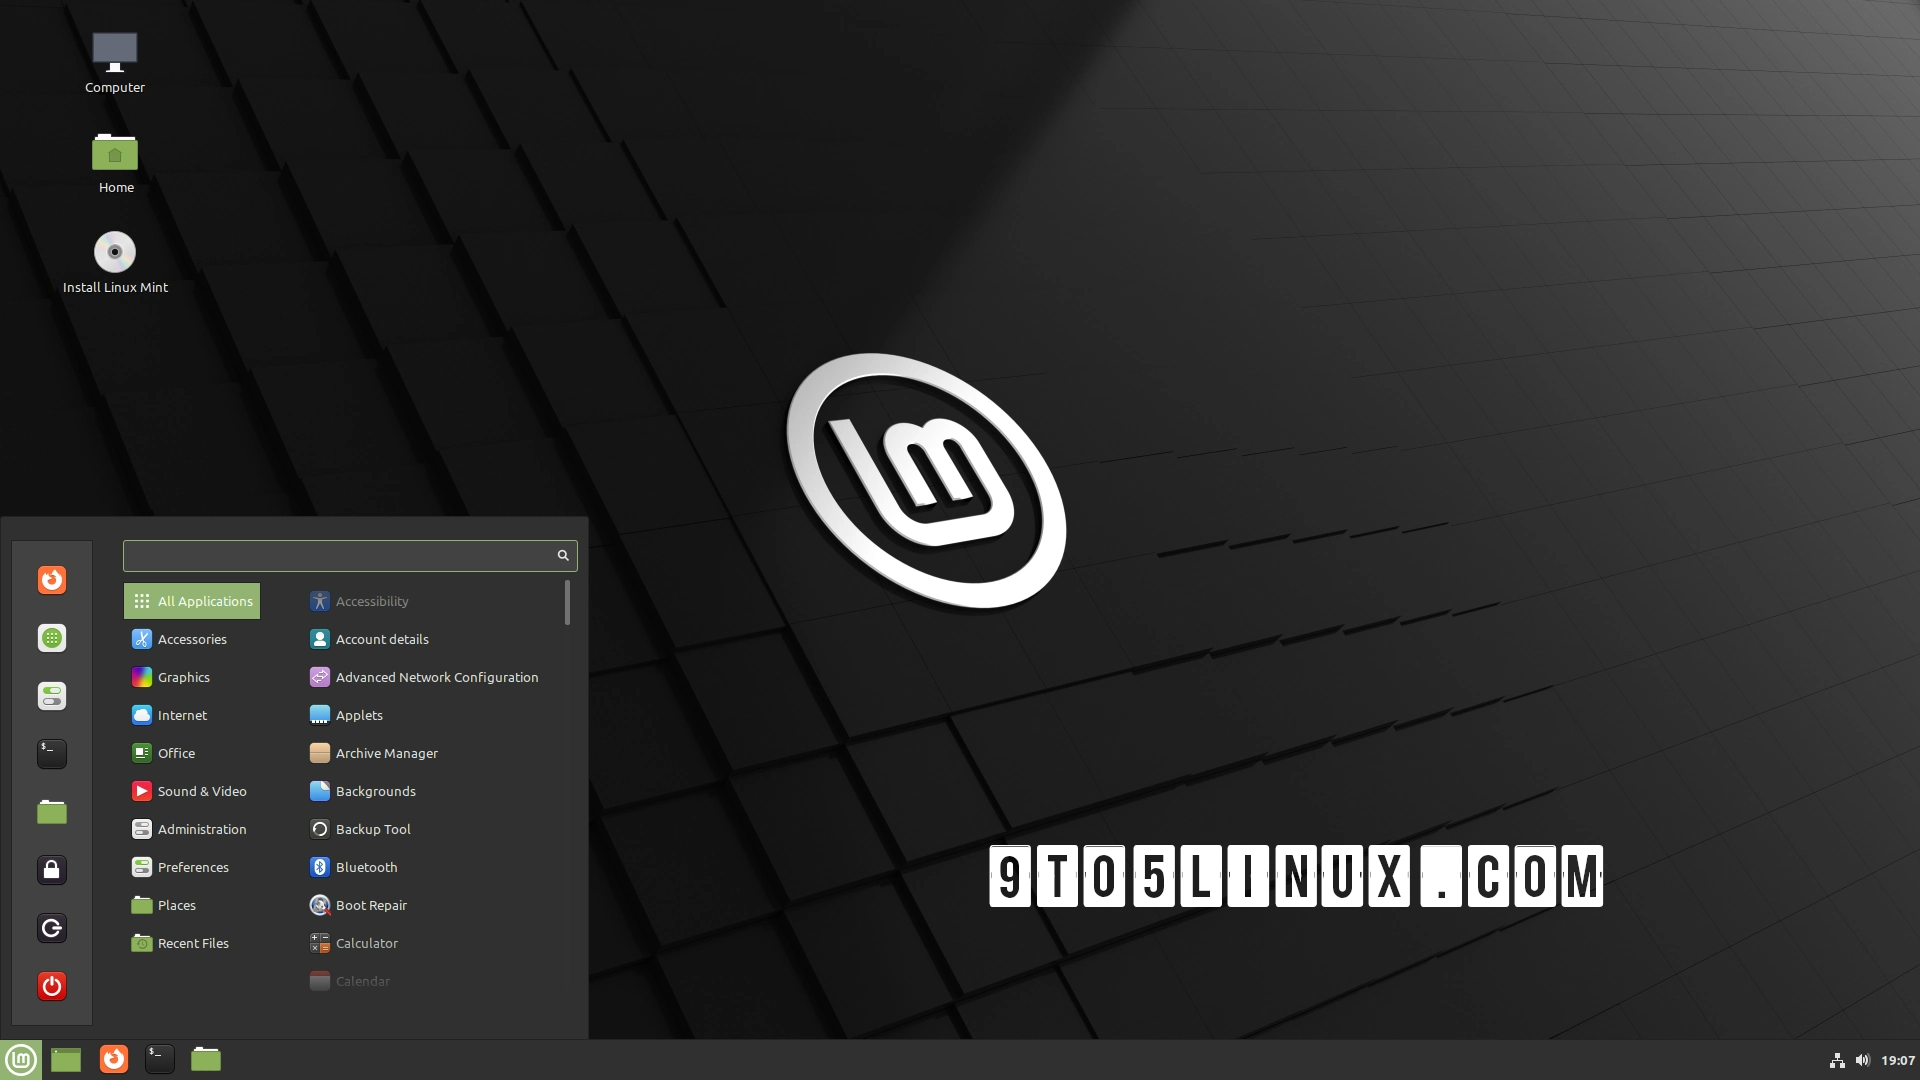 Linux Mint 21 “Vanessa” Will Be Based on Ubuntu 22.04 LTS, New Upgrade Tool in the Works